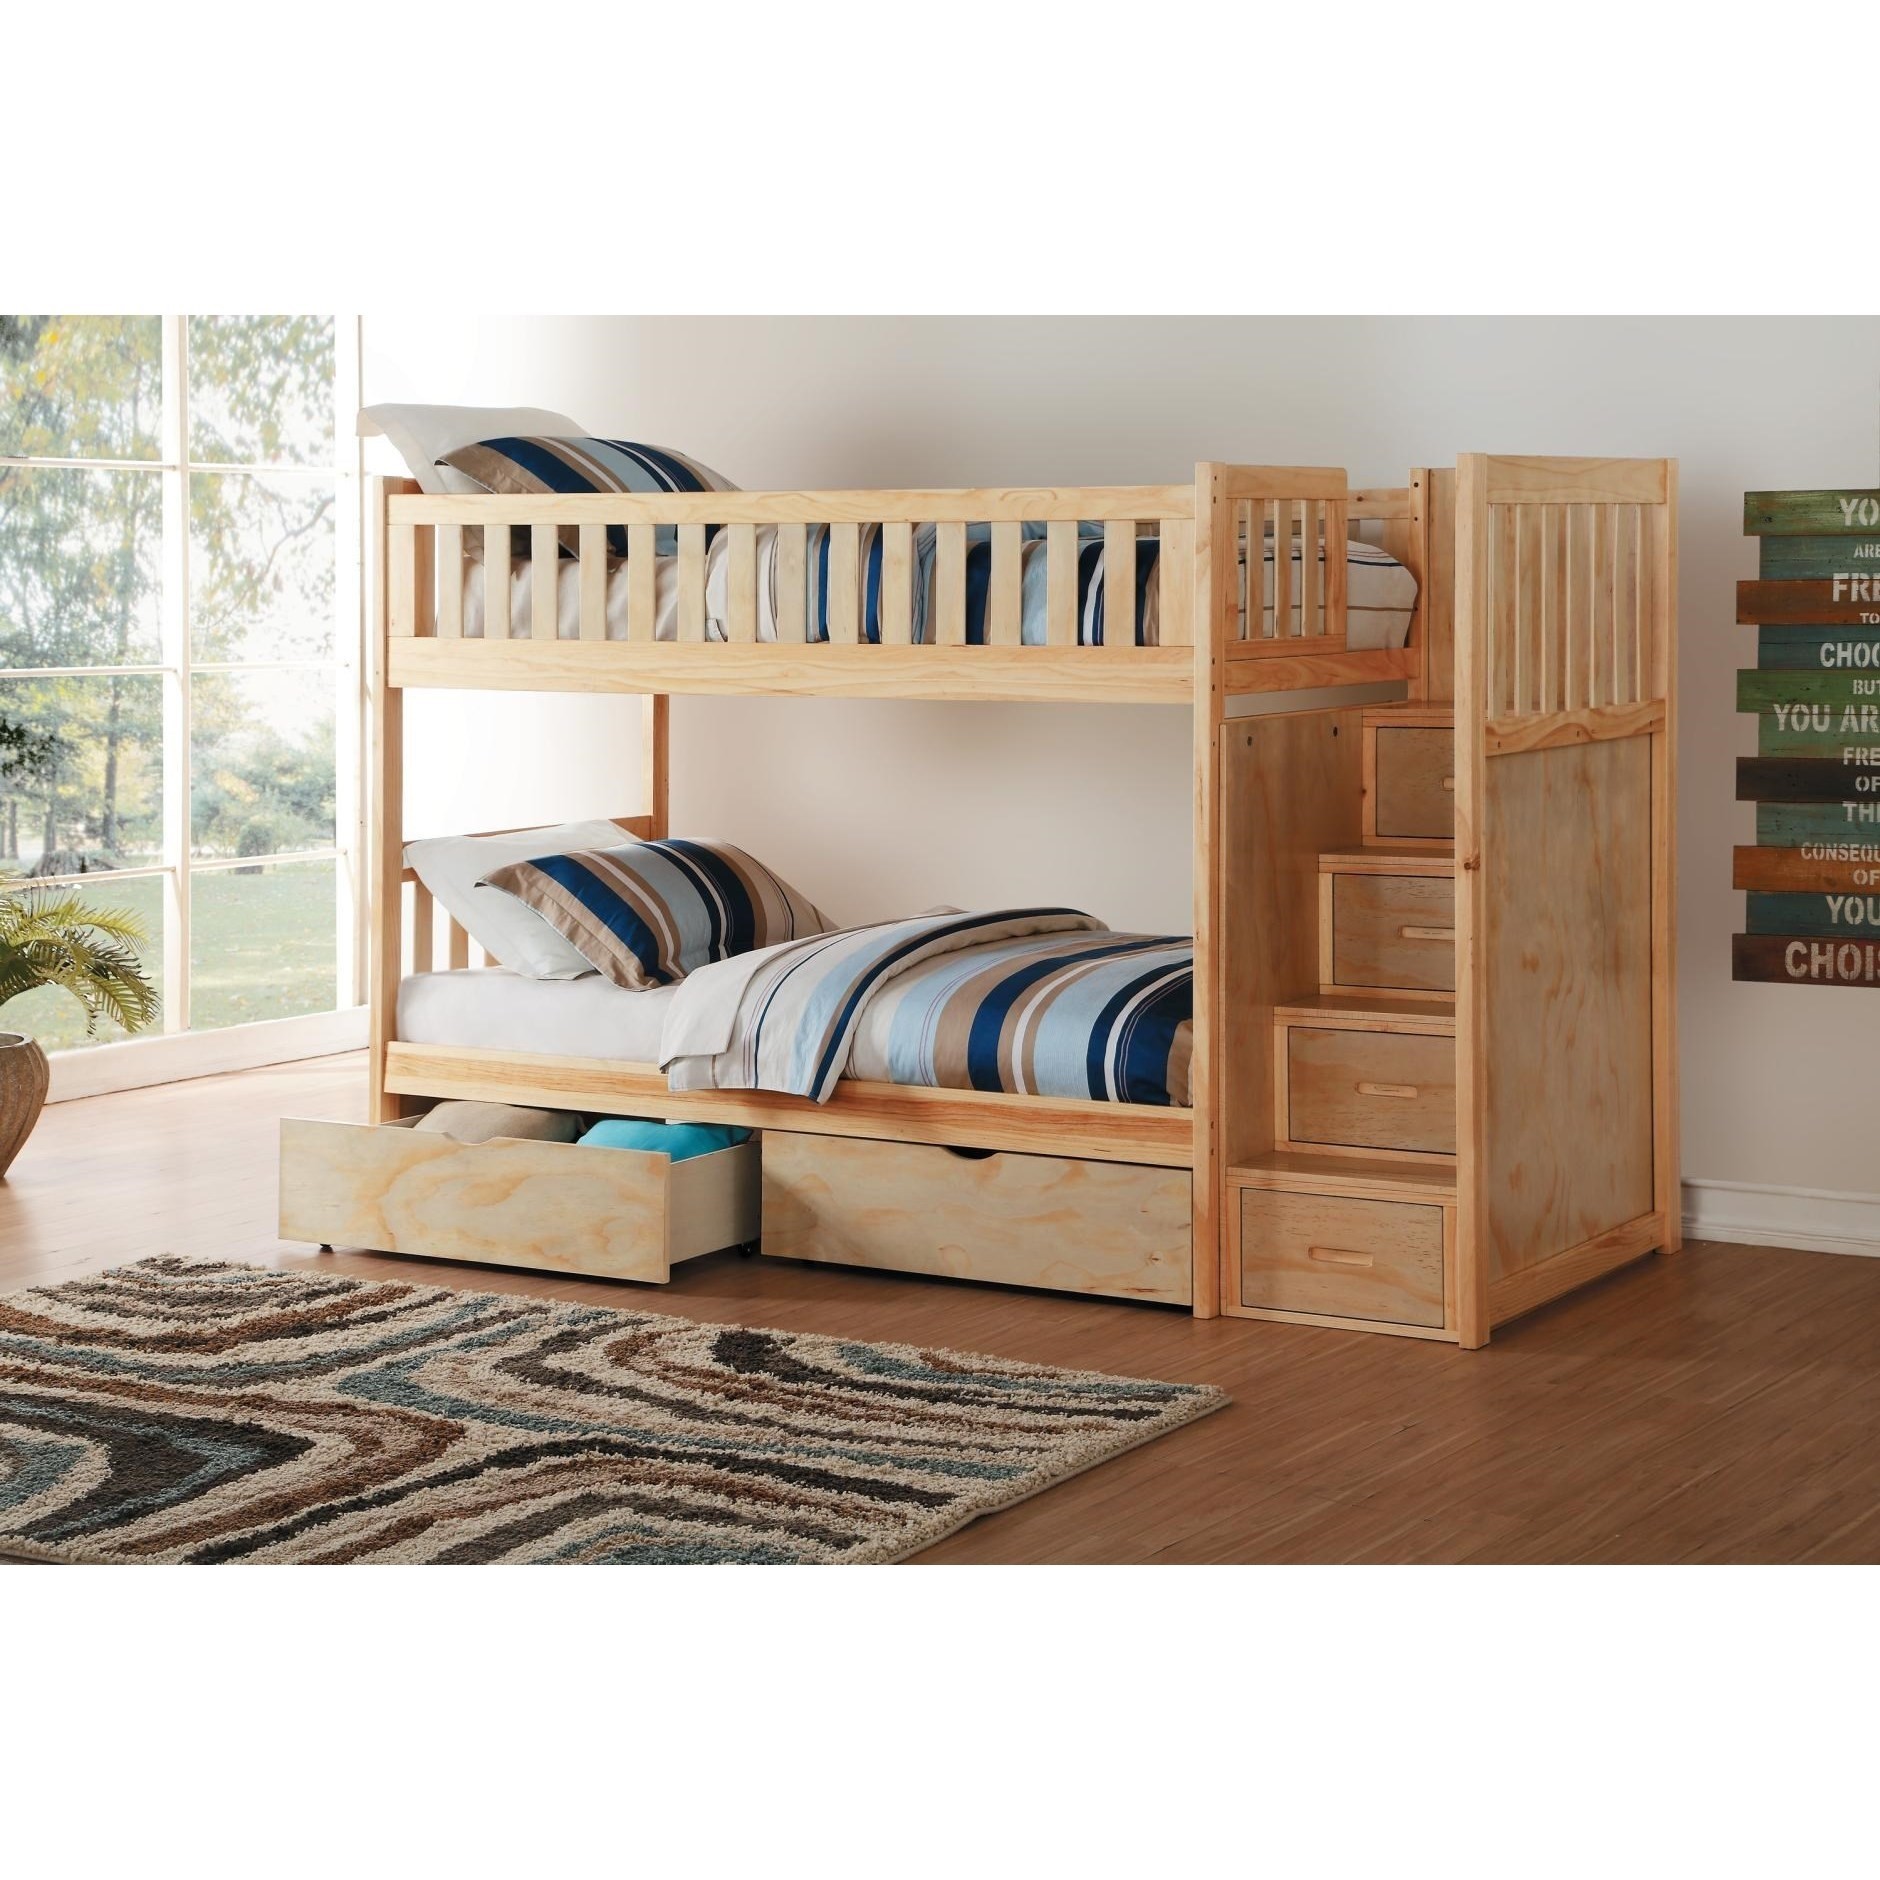 Homelegance bartly casual twin over twin bunk bed with 1